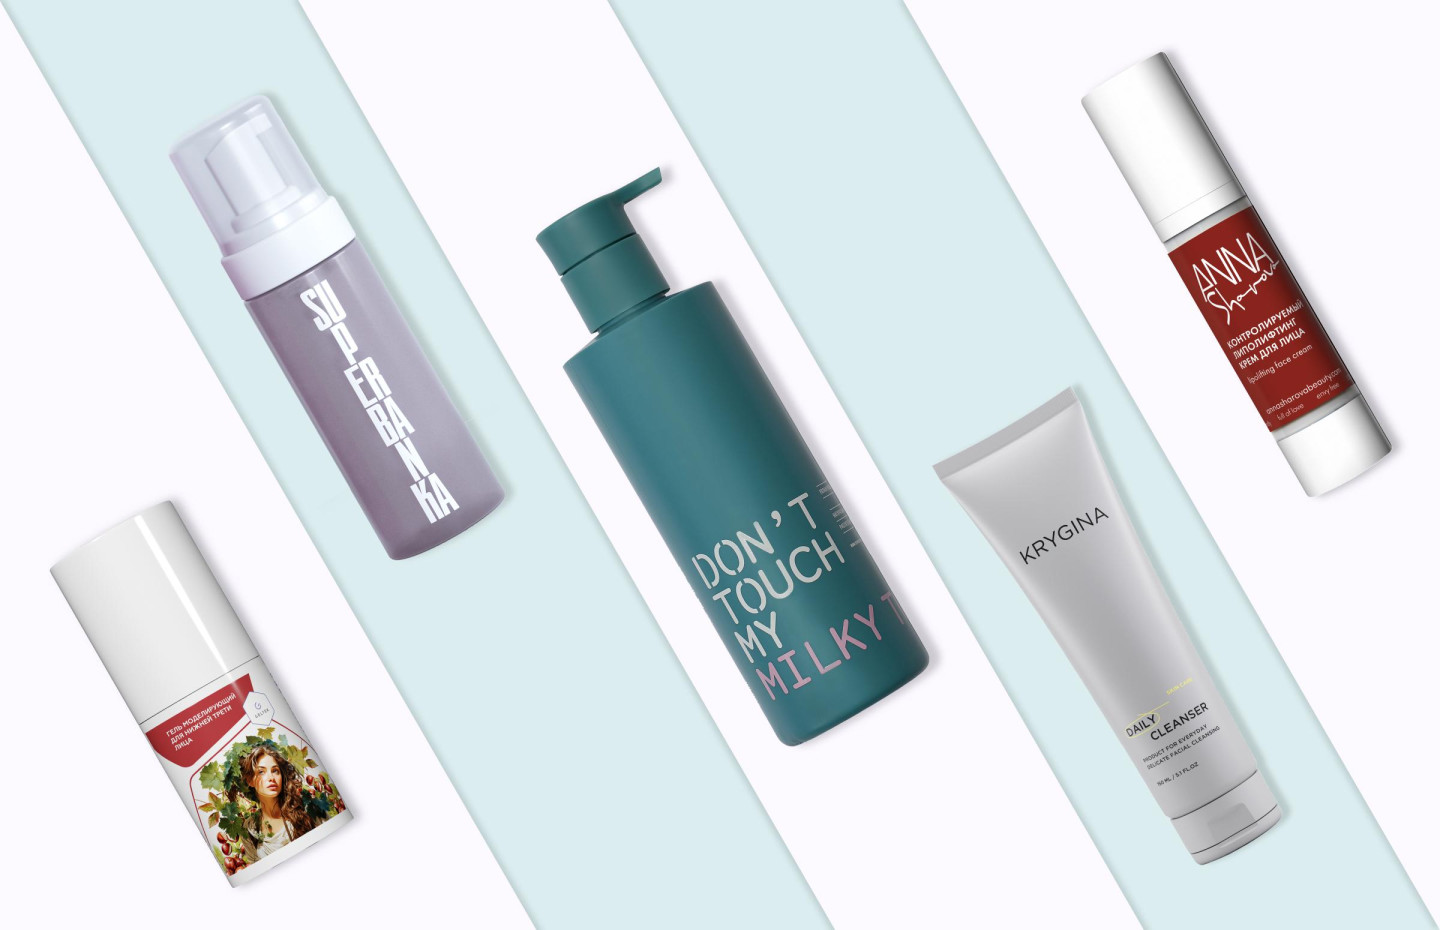 Anti-aging products, milky toner and other beauty news of the week